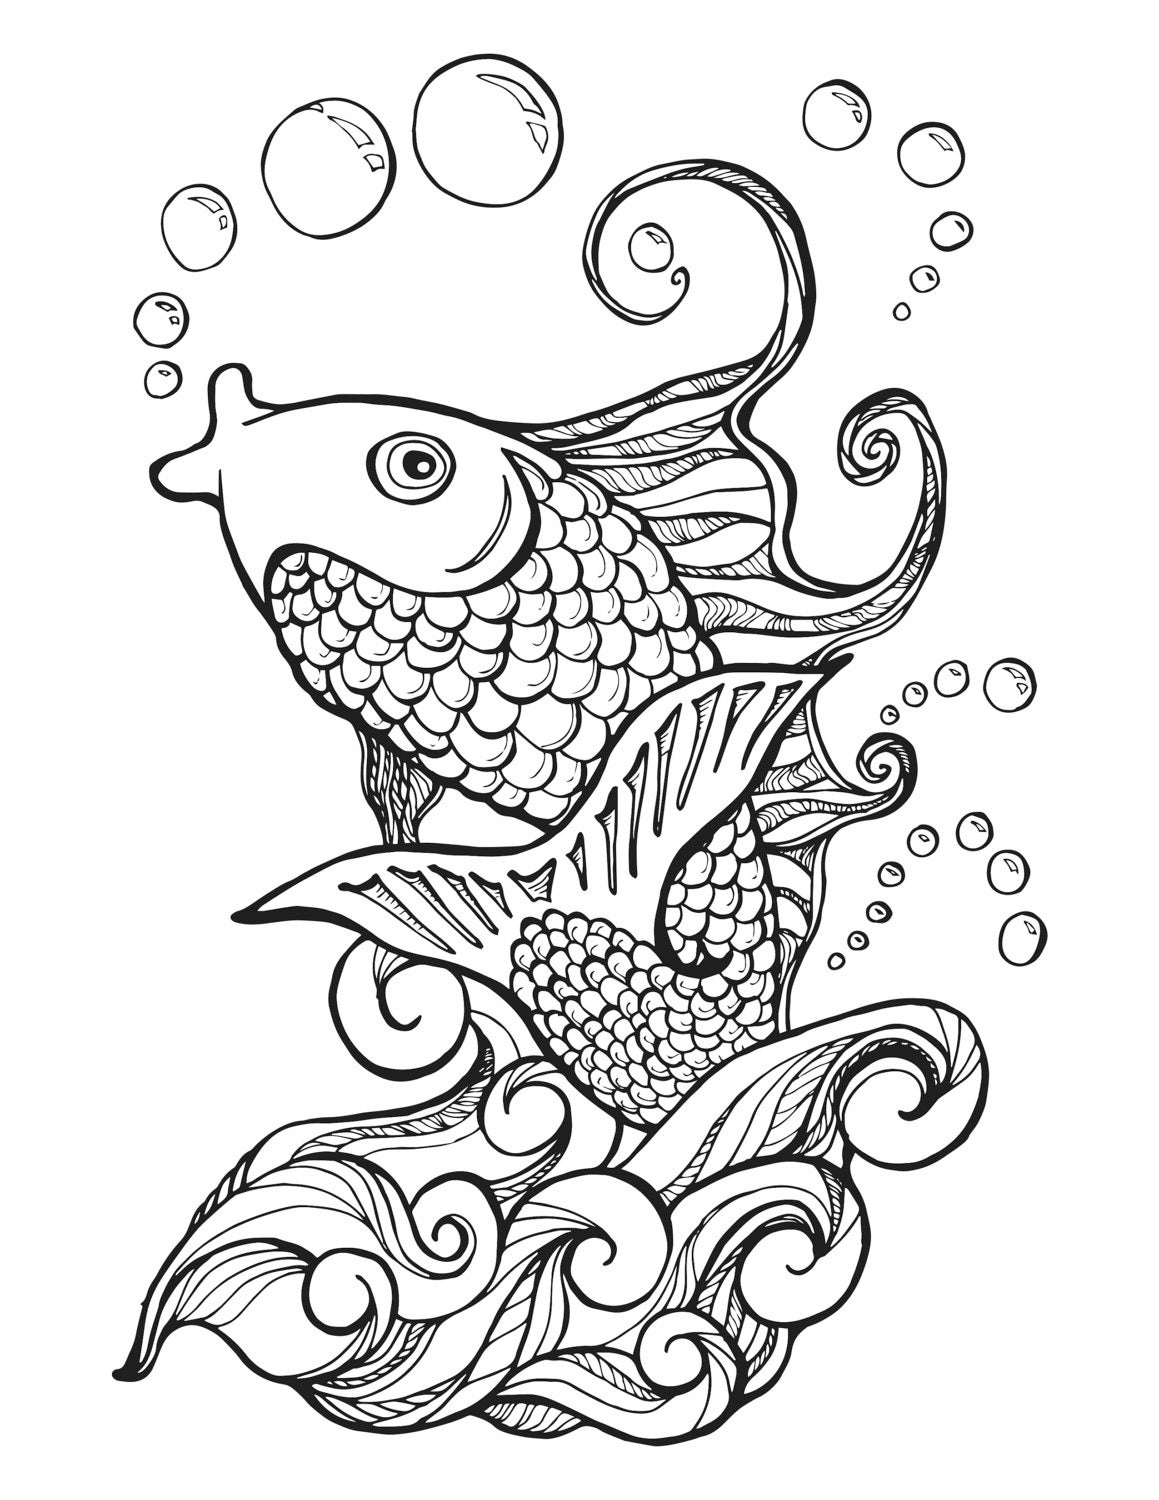 Koi Fish Adult Coloring Page | Etsy